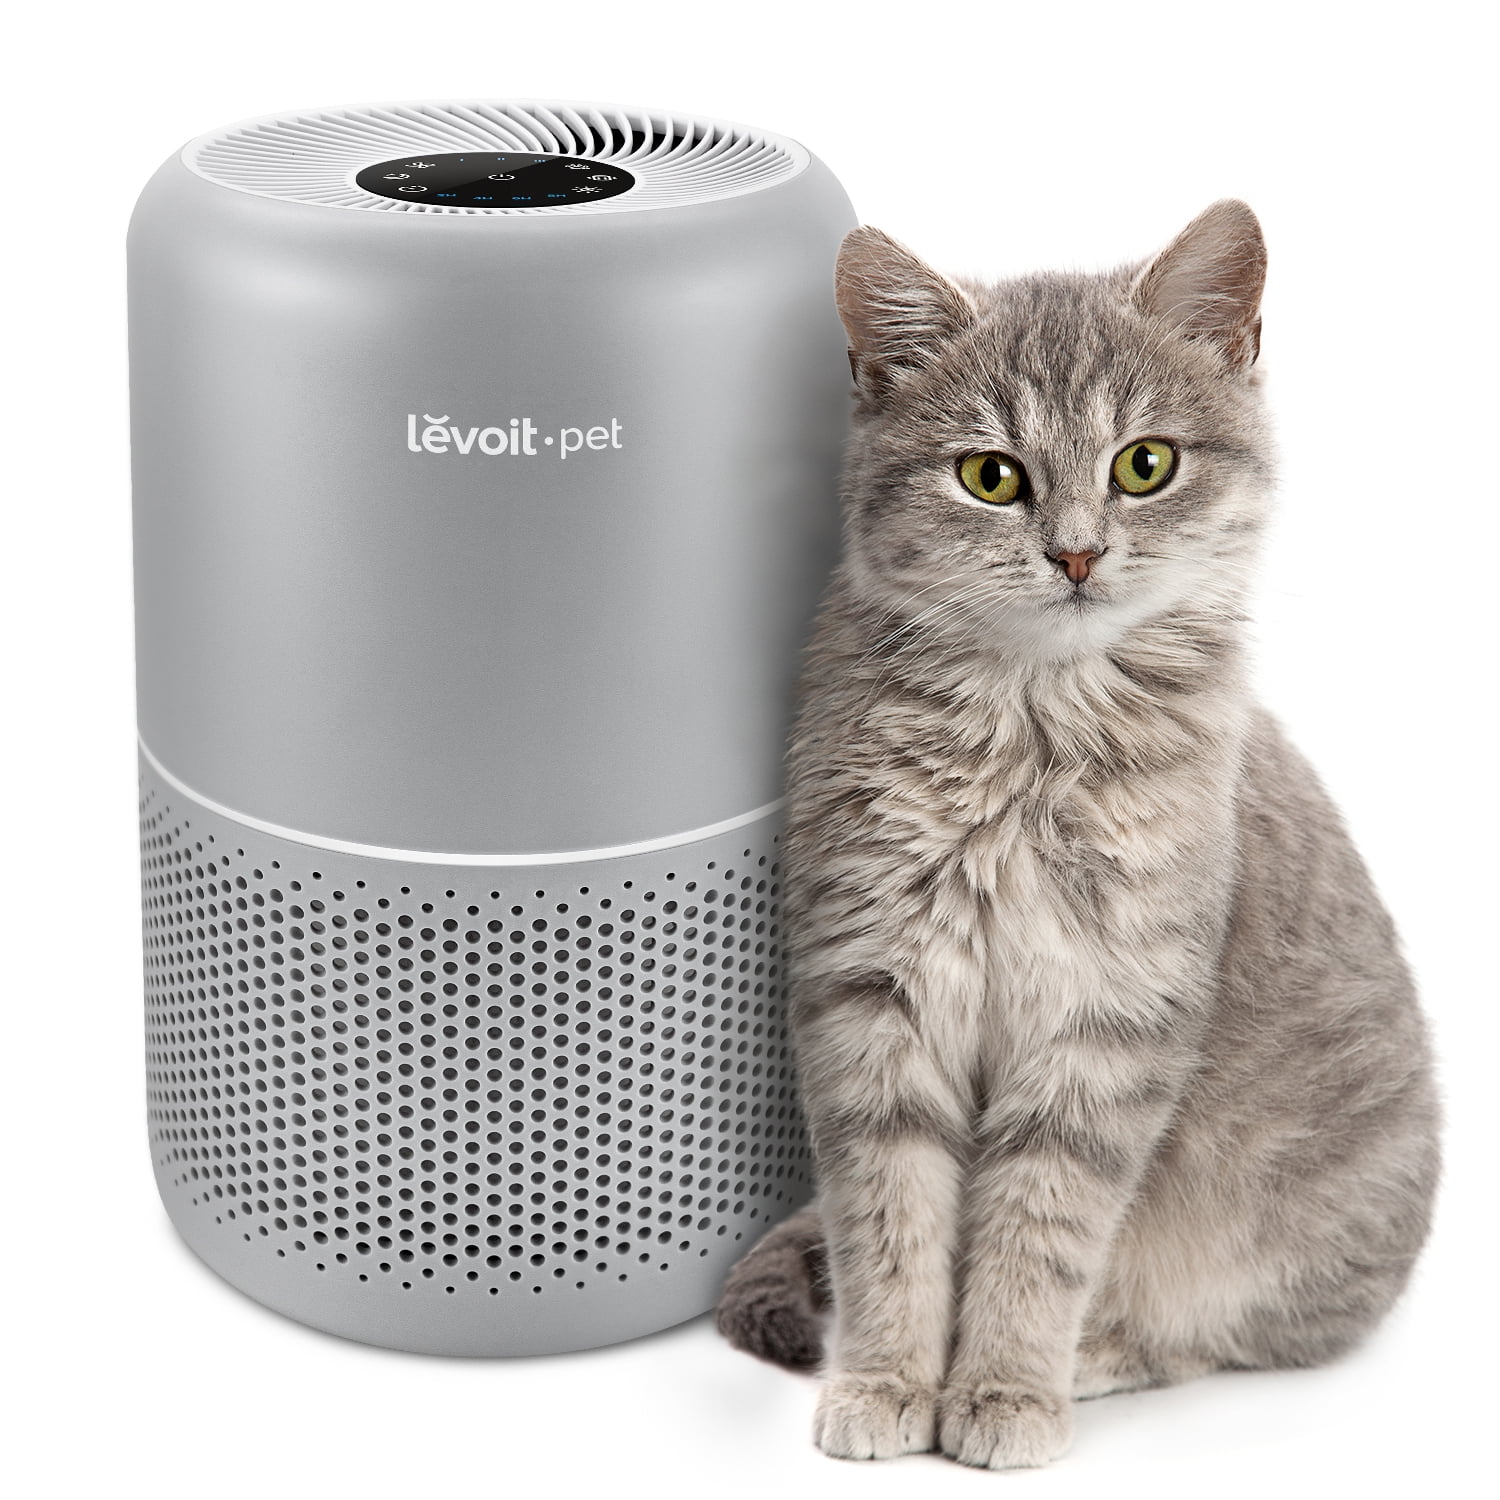 LEVOIT Compact True HEPA Air Purifier with Replacement Filter